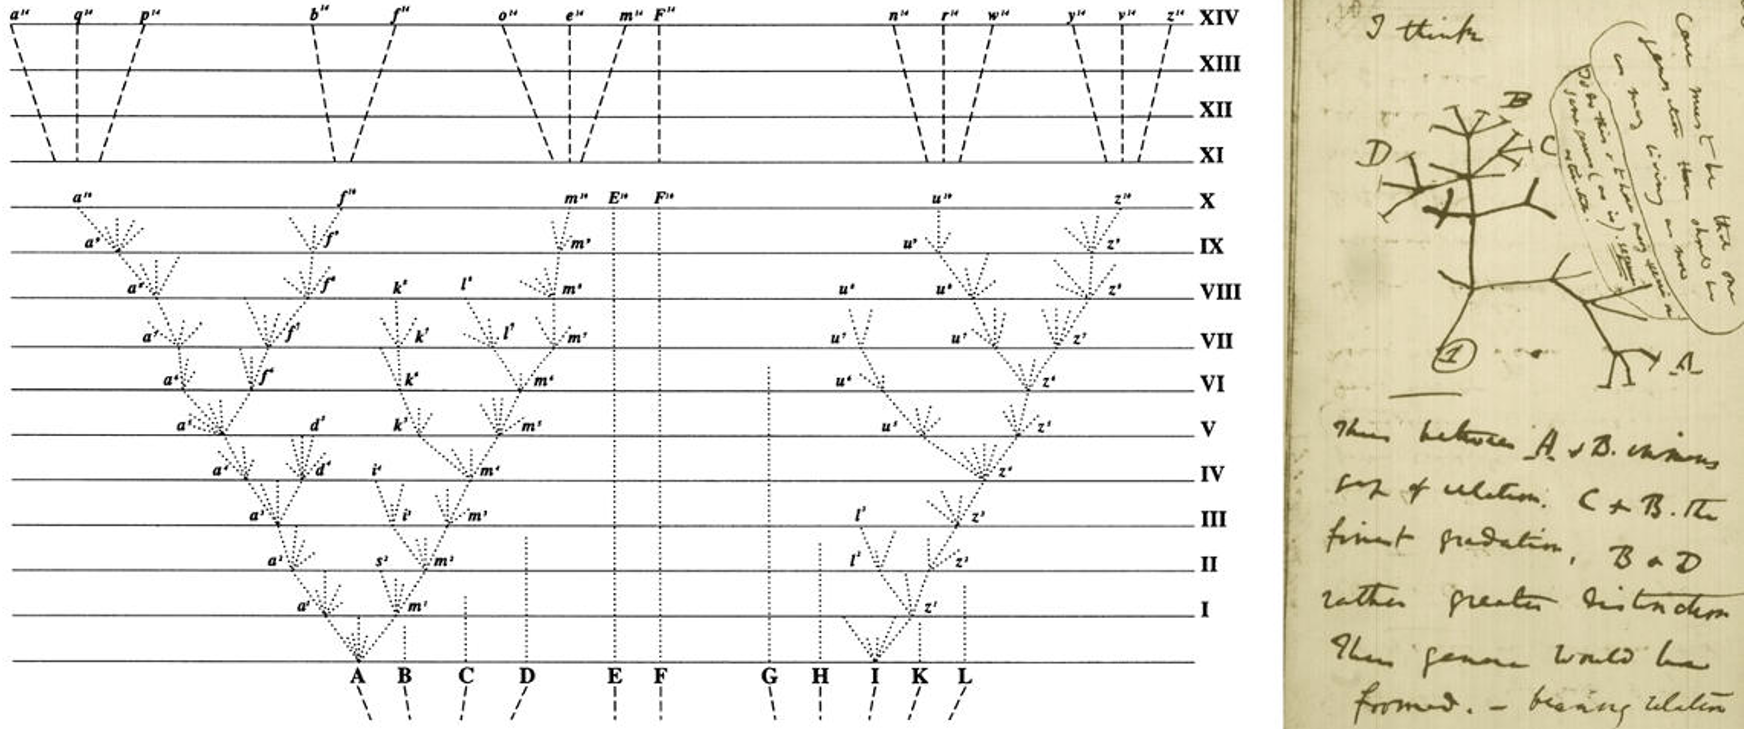 The original phylogenetic trees Darwin used to illustrate common ancestry. Left: The Tree of Life image that appeared in Darwin's *On the Origin of Species by Natural Selection* (1859). It was the book's only illustration. Right: Charles Darwin's original 1837 sketch, his first diagram of an evolutionary tree from his *First Notebook on Transmutation of Species* (1837). Illustrations by Charles Darwin, [Public Domain](https://creativecommons.org/publicdomain/zero/1.0/).